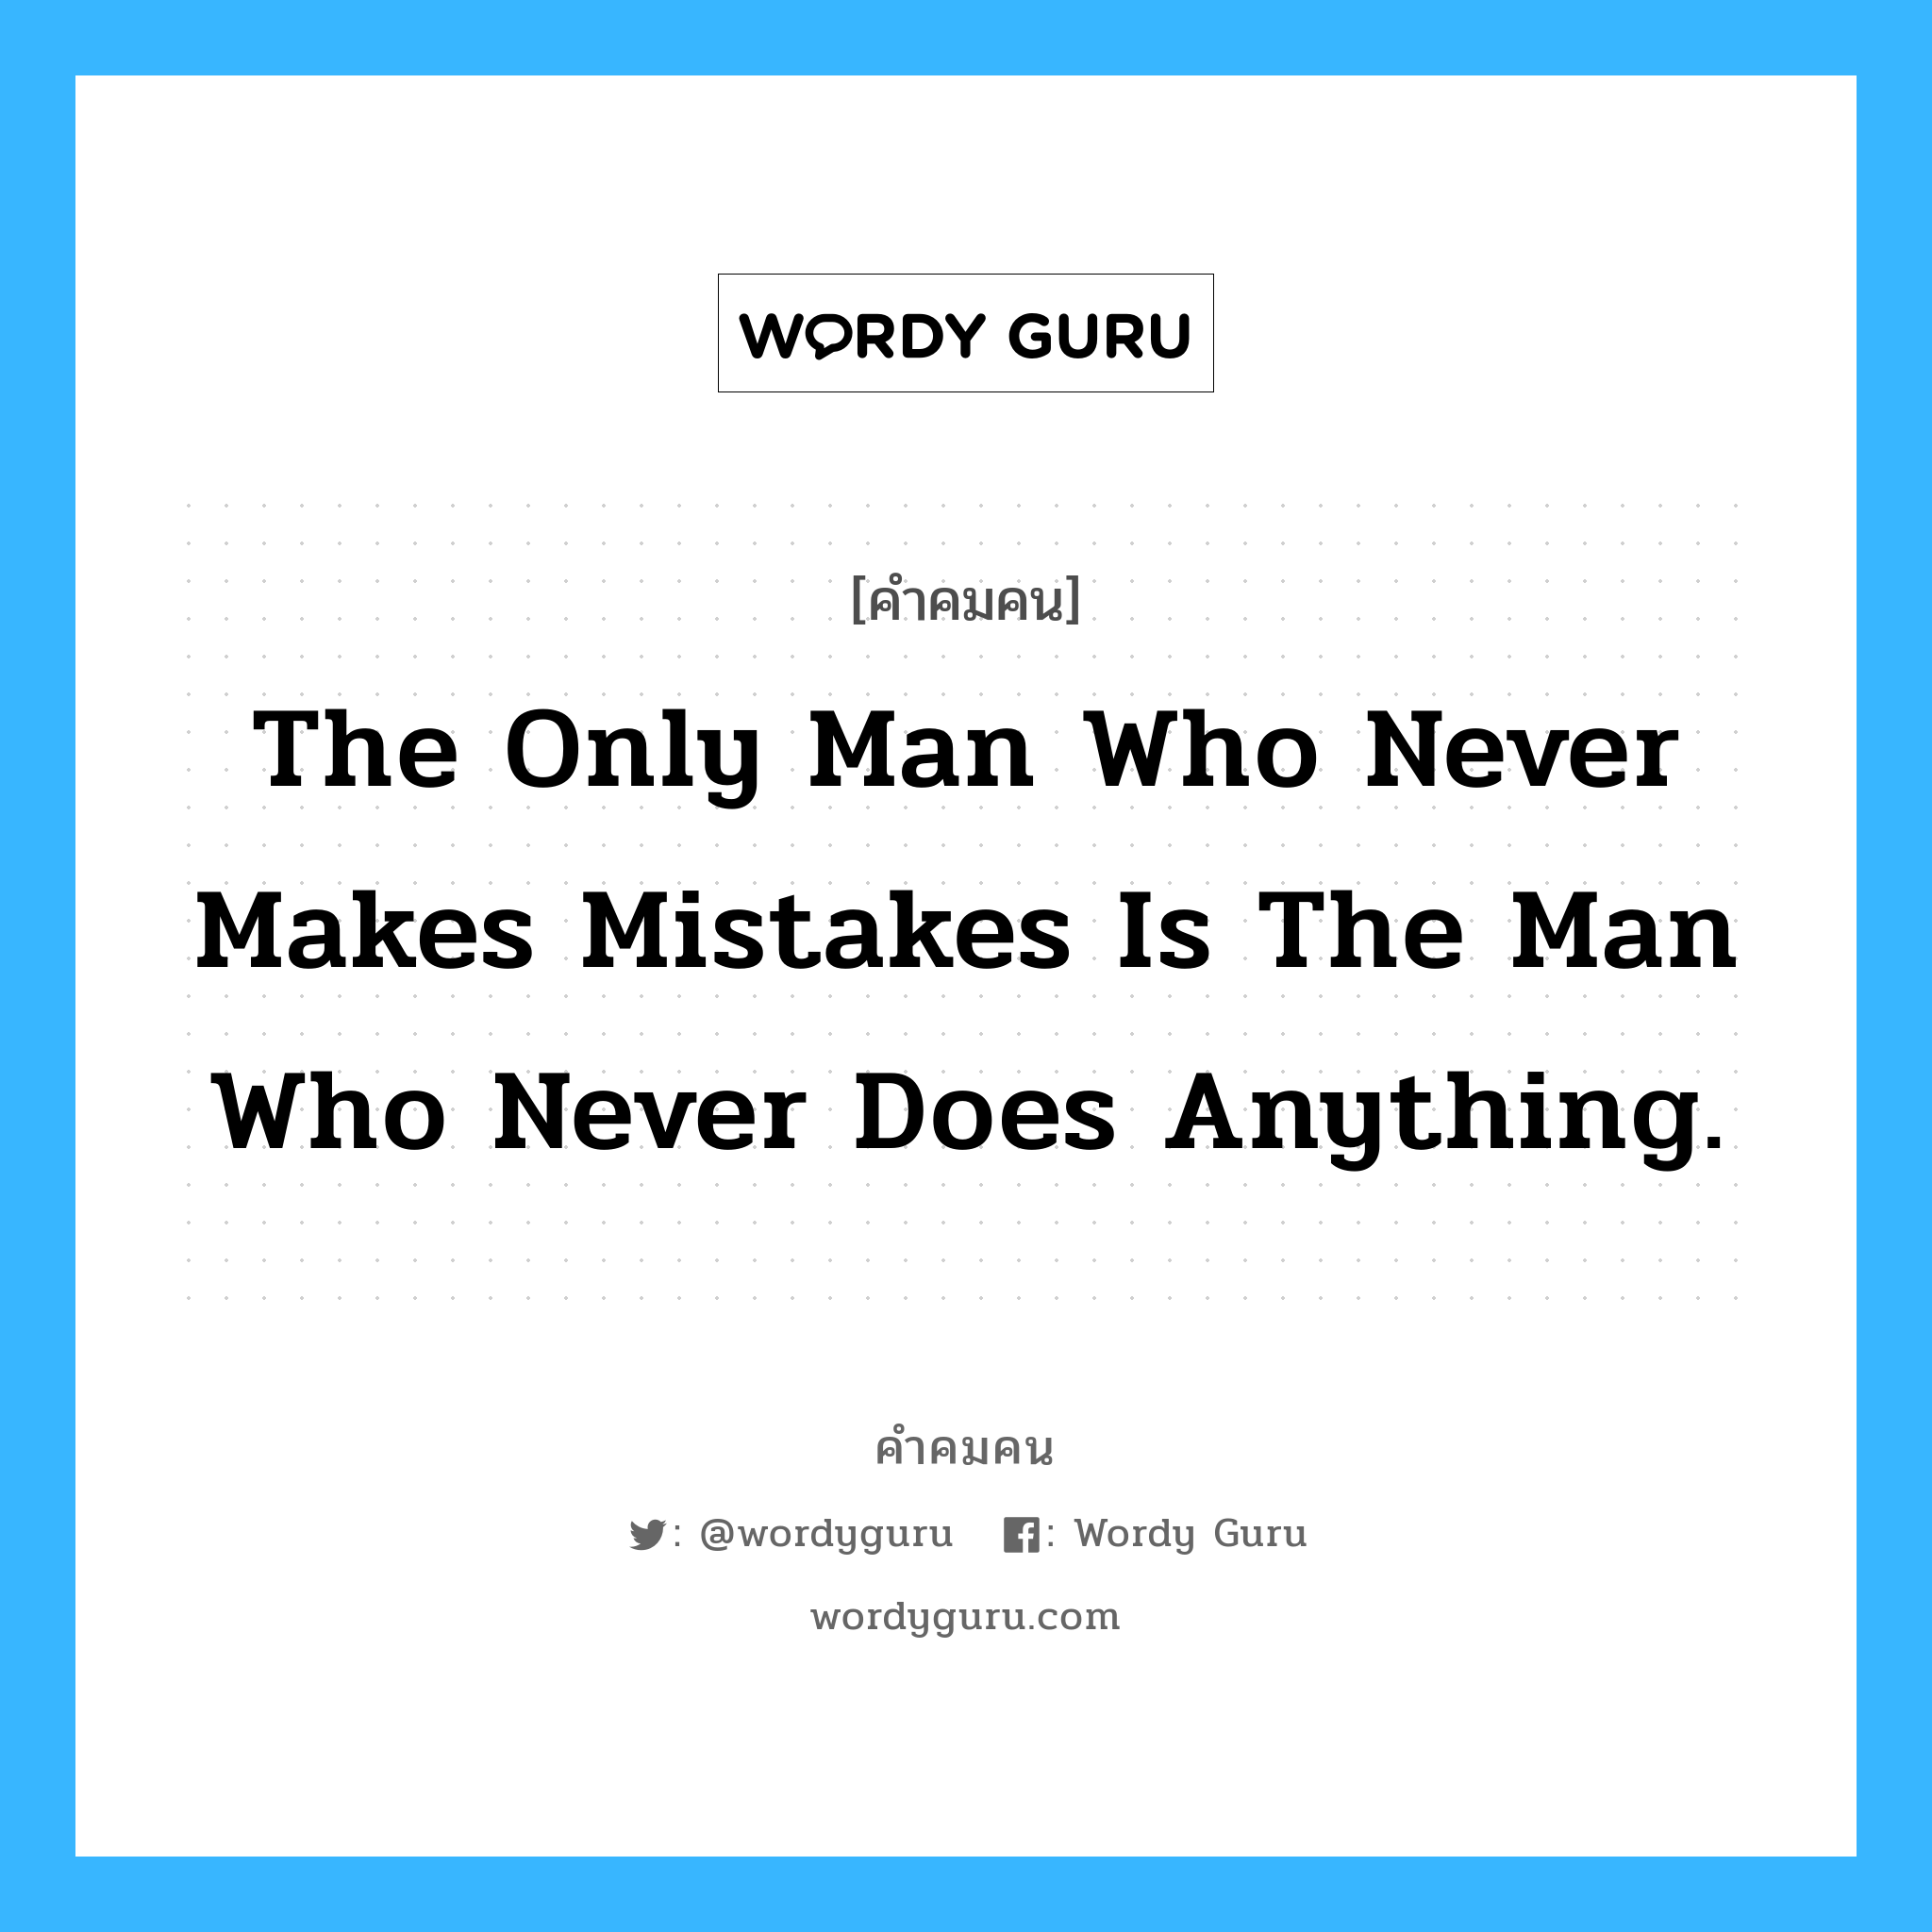 The only man who never makes mistakes is the man who never does anything. อยู่ในกลุ่มประเภท T.Roosevelt, คำคมคน The only man who never makes mistakes is the man who never does anything. คนที่ไม่เคยทำผิดคือคนที่ไม่ได้ทำอะไรเลย T.Roosevelt หมวด T.Roosevelt